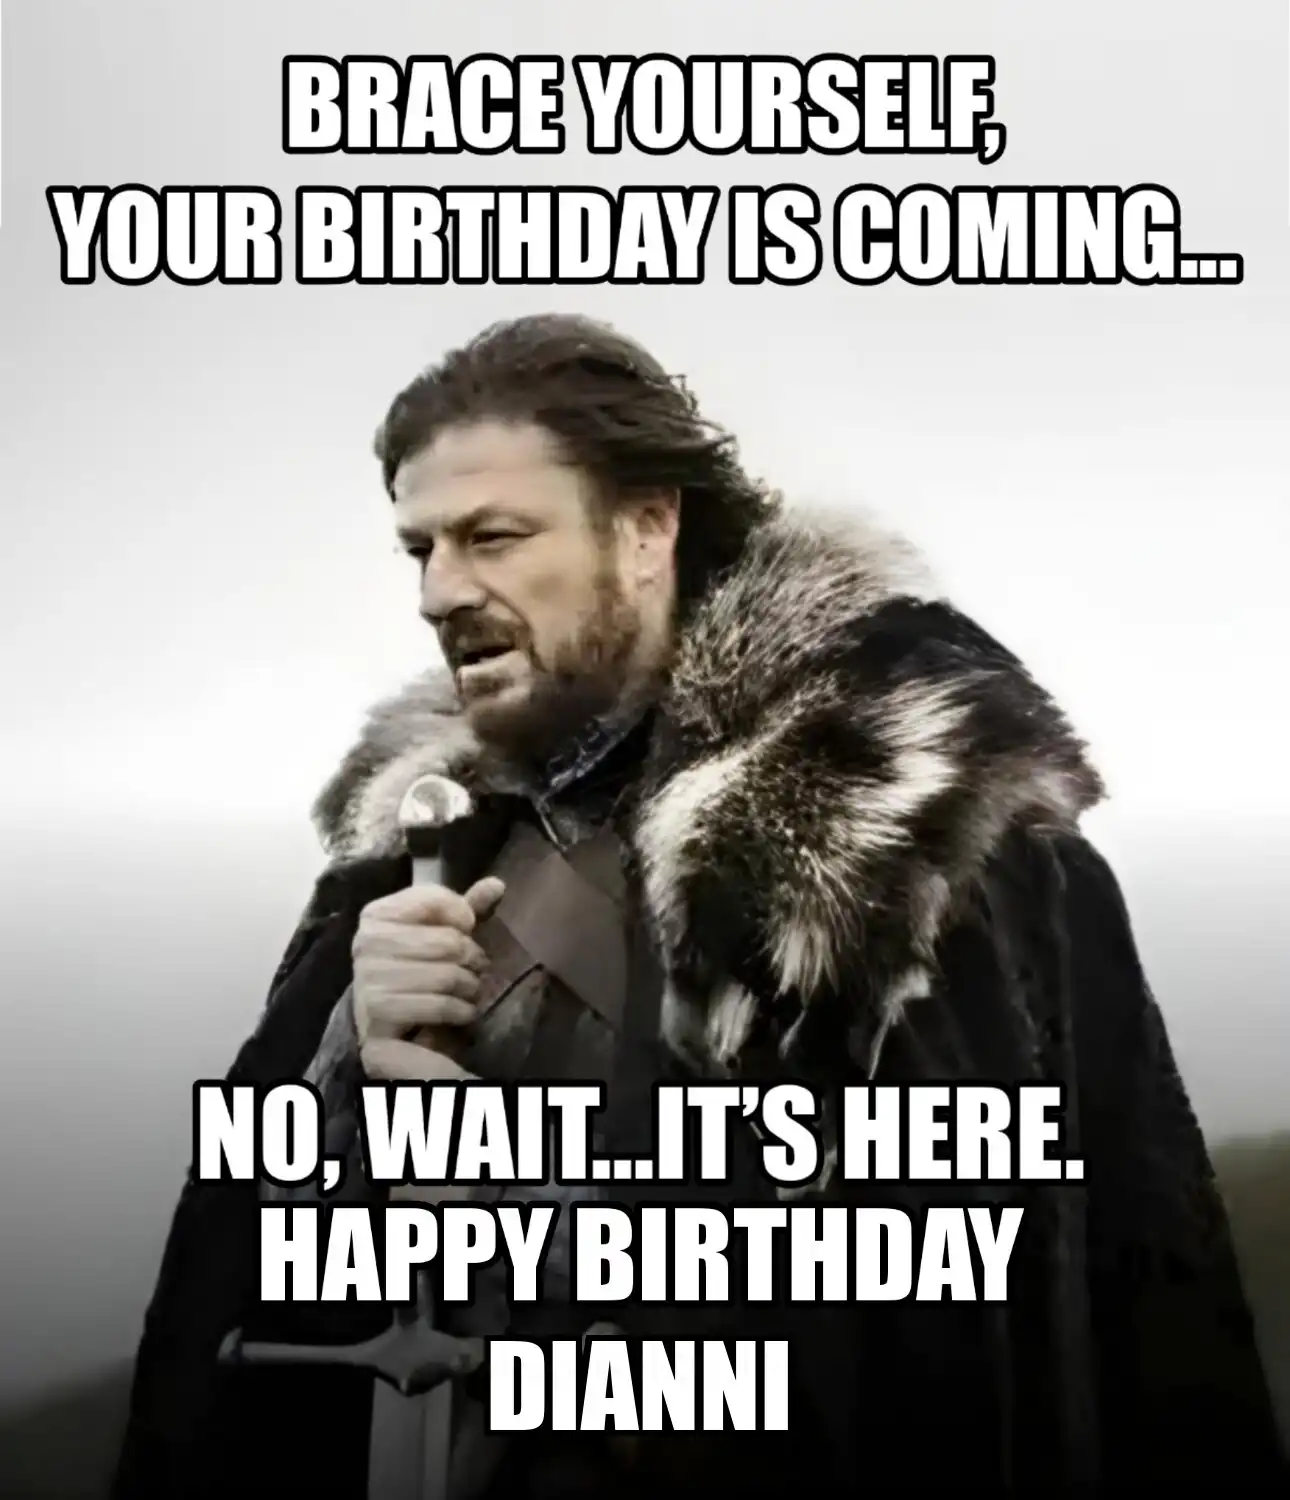 Happy Birthday Dianni Brace Yourself Your Birthday Is Coming Meme